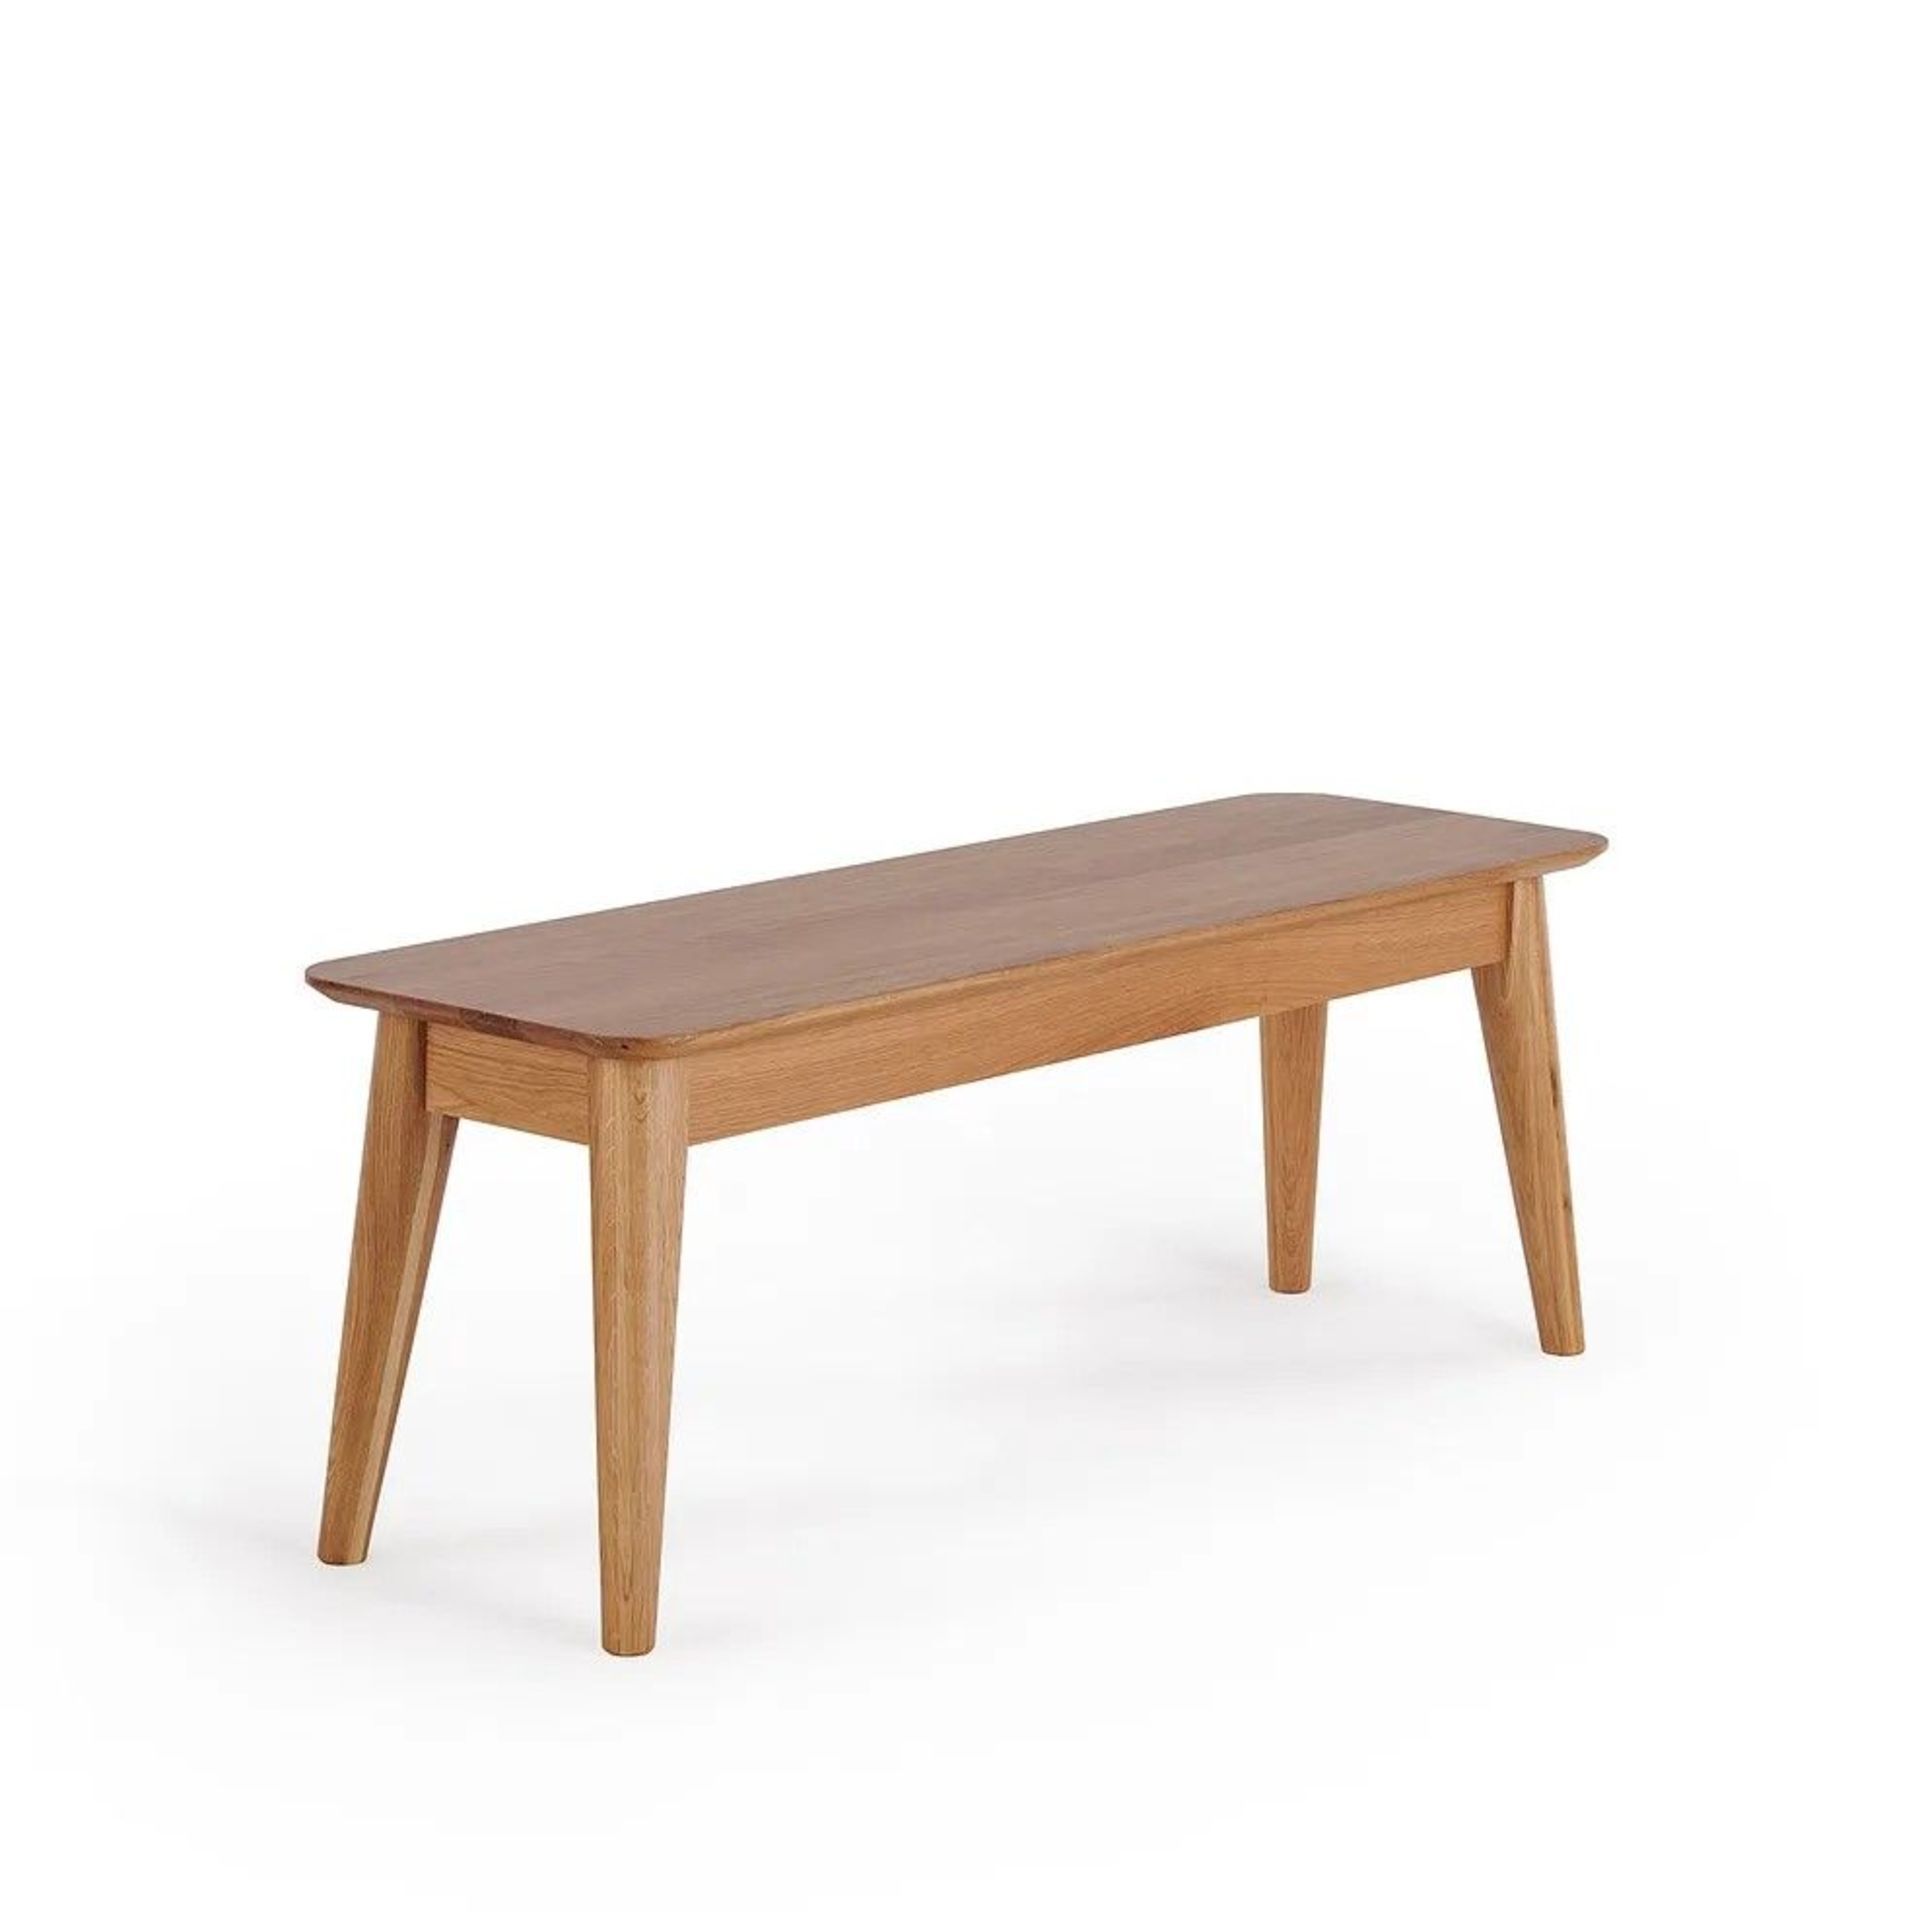 New Boxed - Oscar Natural Solid Oak Bench. 120cm Long. RRP £290 For a more open seating